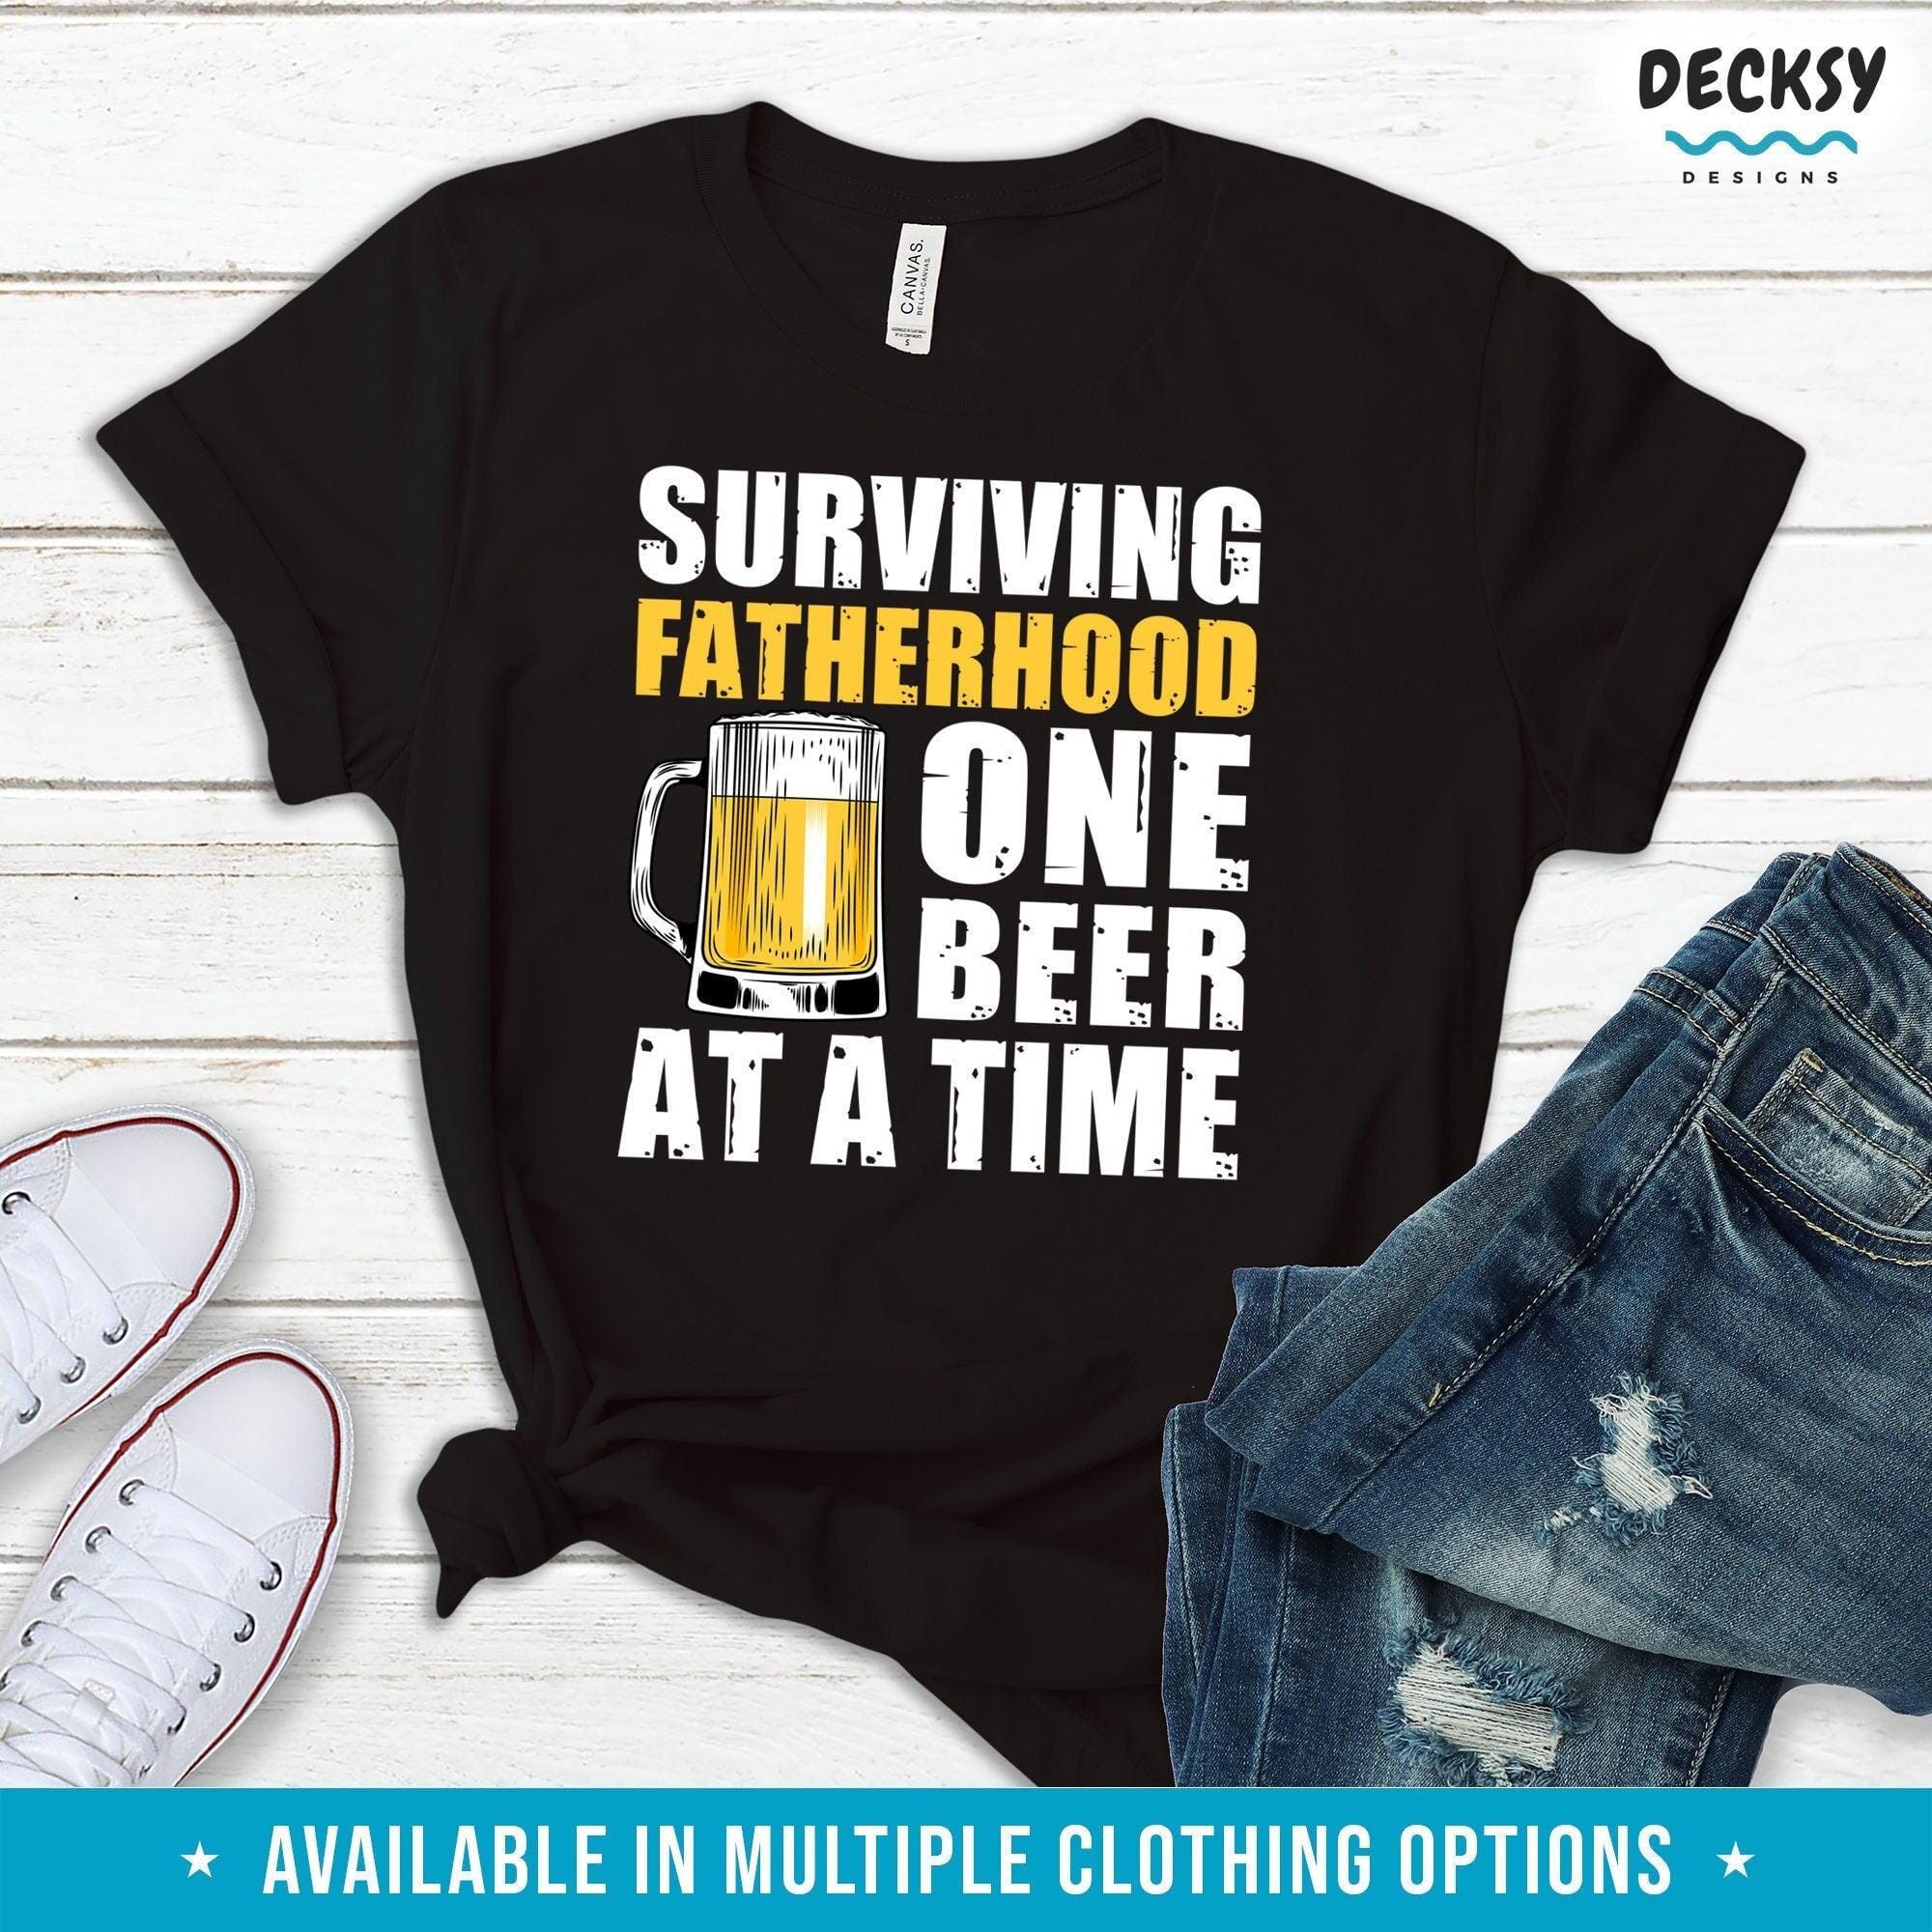 New Dad Tshirt, Funny Beer Dad Gift-Clothing:Gender-Neutral Adult Clothing:Tops & Tees:T-shirts:Graphic Tees-DecksyDesigns